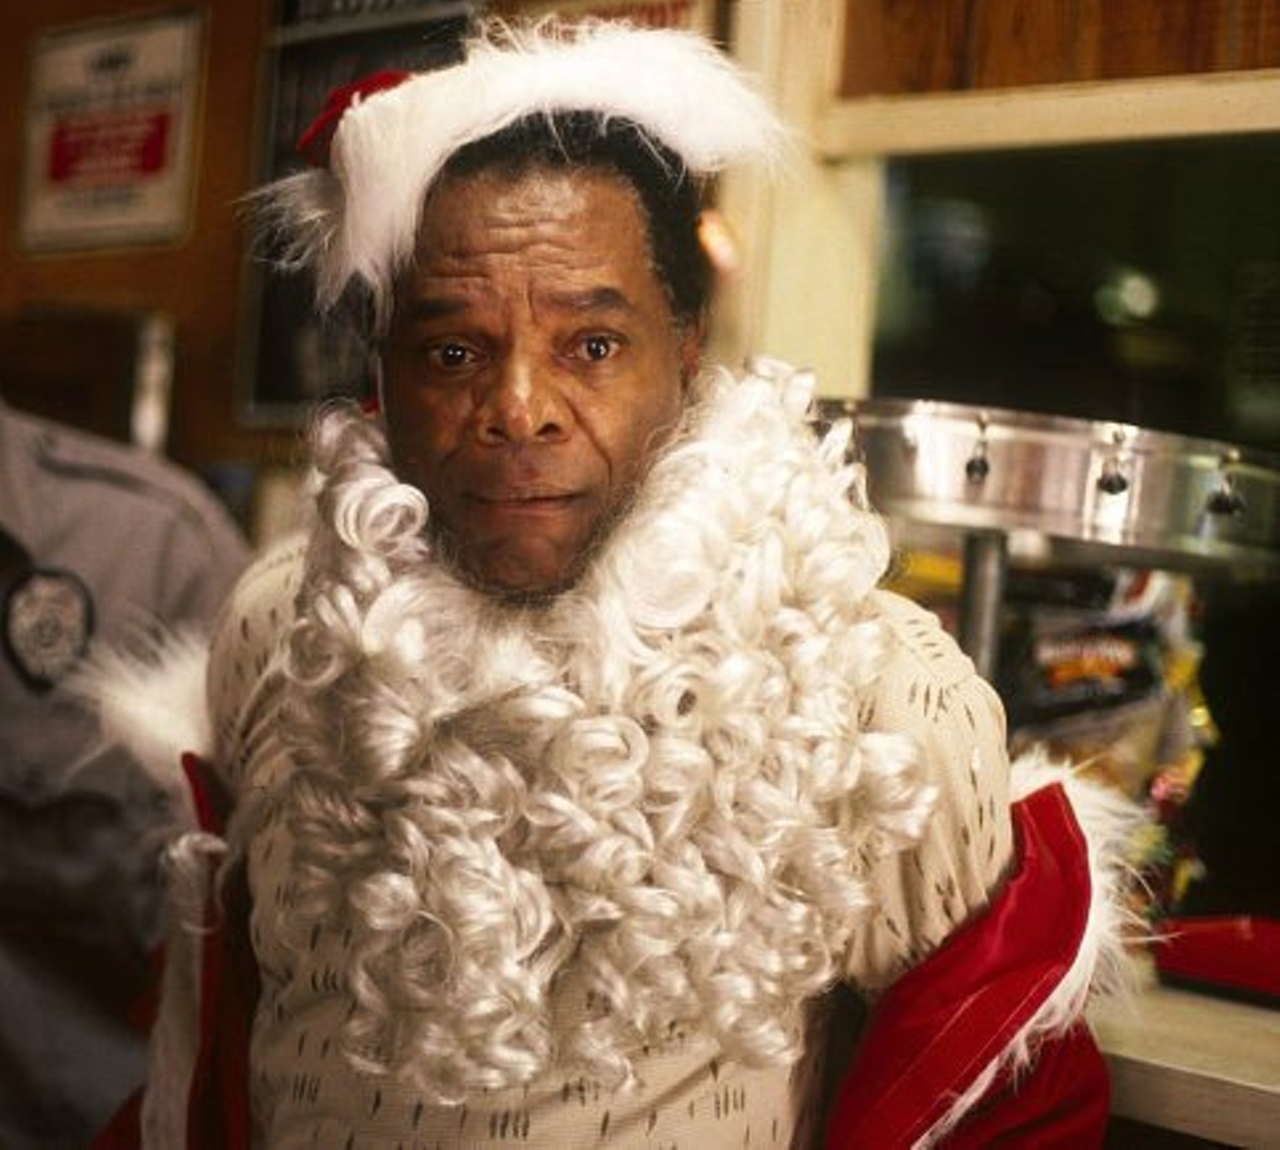 If you’re going to see comedian John Witherspoon tonight at the Improv, you better dress up because “you got to coordinate,” as he puts it. That catchphrase is just one of the comedian’s many one-liners and various accomplishments throughout his long career. He’s worked alongside famous comedians such as Ice Cube, Adam Sandler, Eddie Murphy and Chris Tucker and starred as “Pops” on The Wayans Bros. But he might be best known for voicing “Granddad” on the animated series The Boondocks. His standup is even similar to the Boondocks character he portrays; it features fast-paced jokes that keep coming at you. Witherspoon has a look about him that’s simply funny. He doesn’t even need to tell jokes because his facial expressions can make anyone laugh all night. He performs tonight at 7:30 and 10:15 and is at the club through Sunday. Tickets are $25. (William Hoffman)